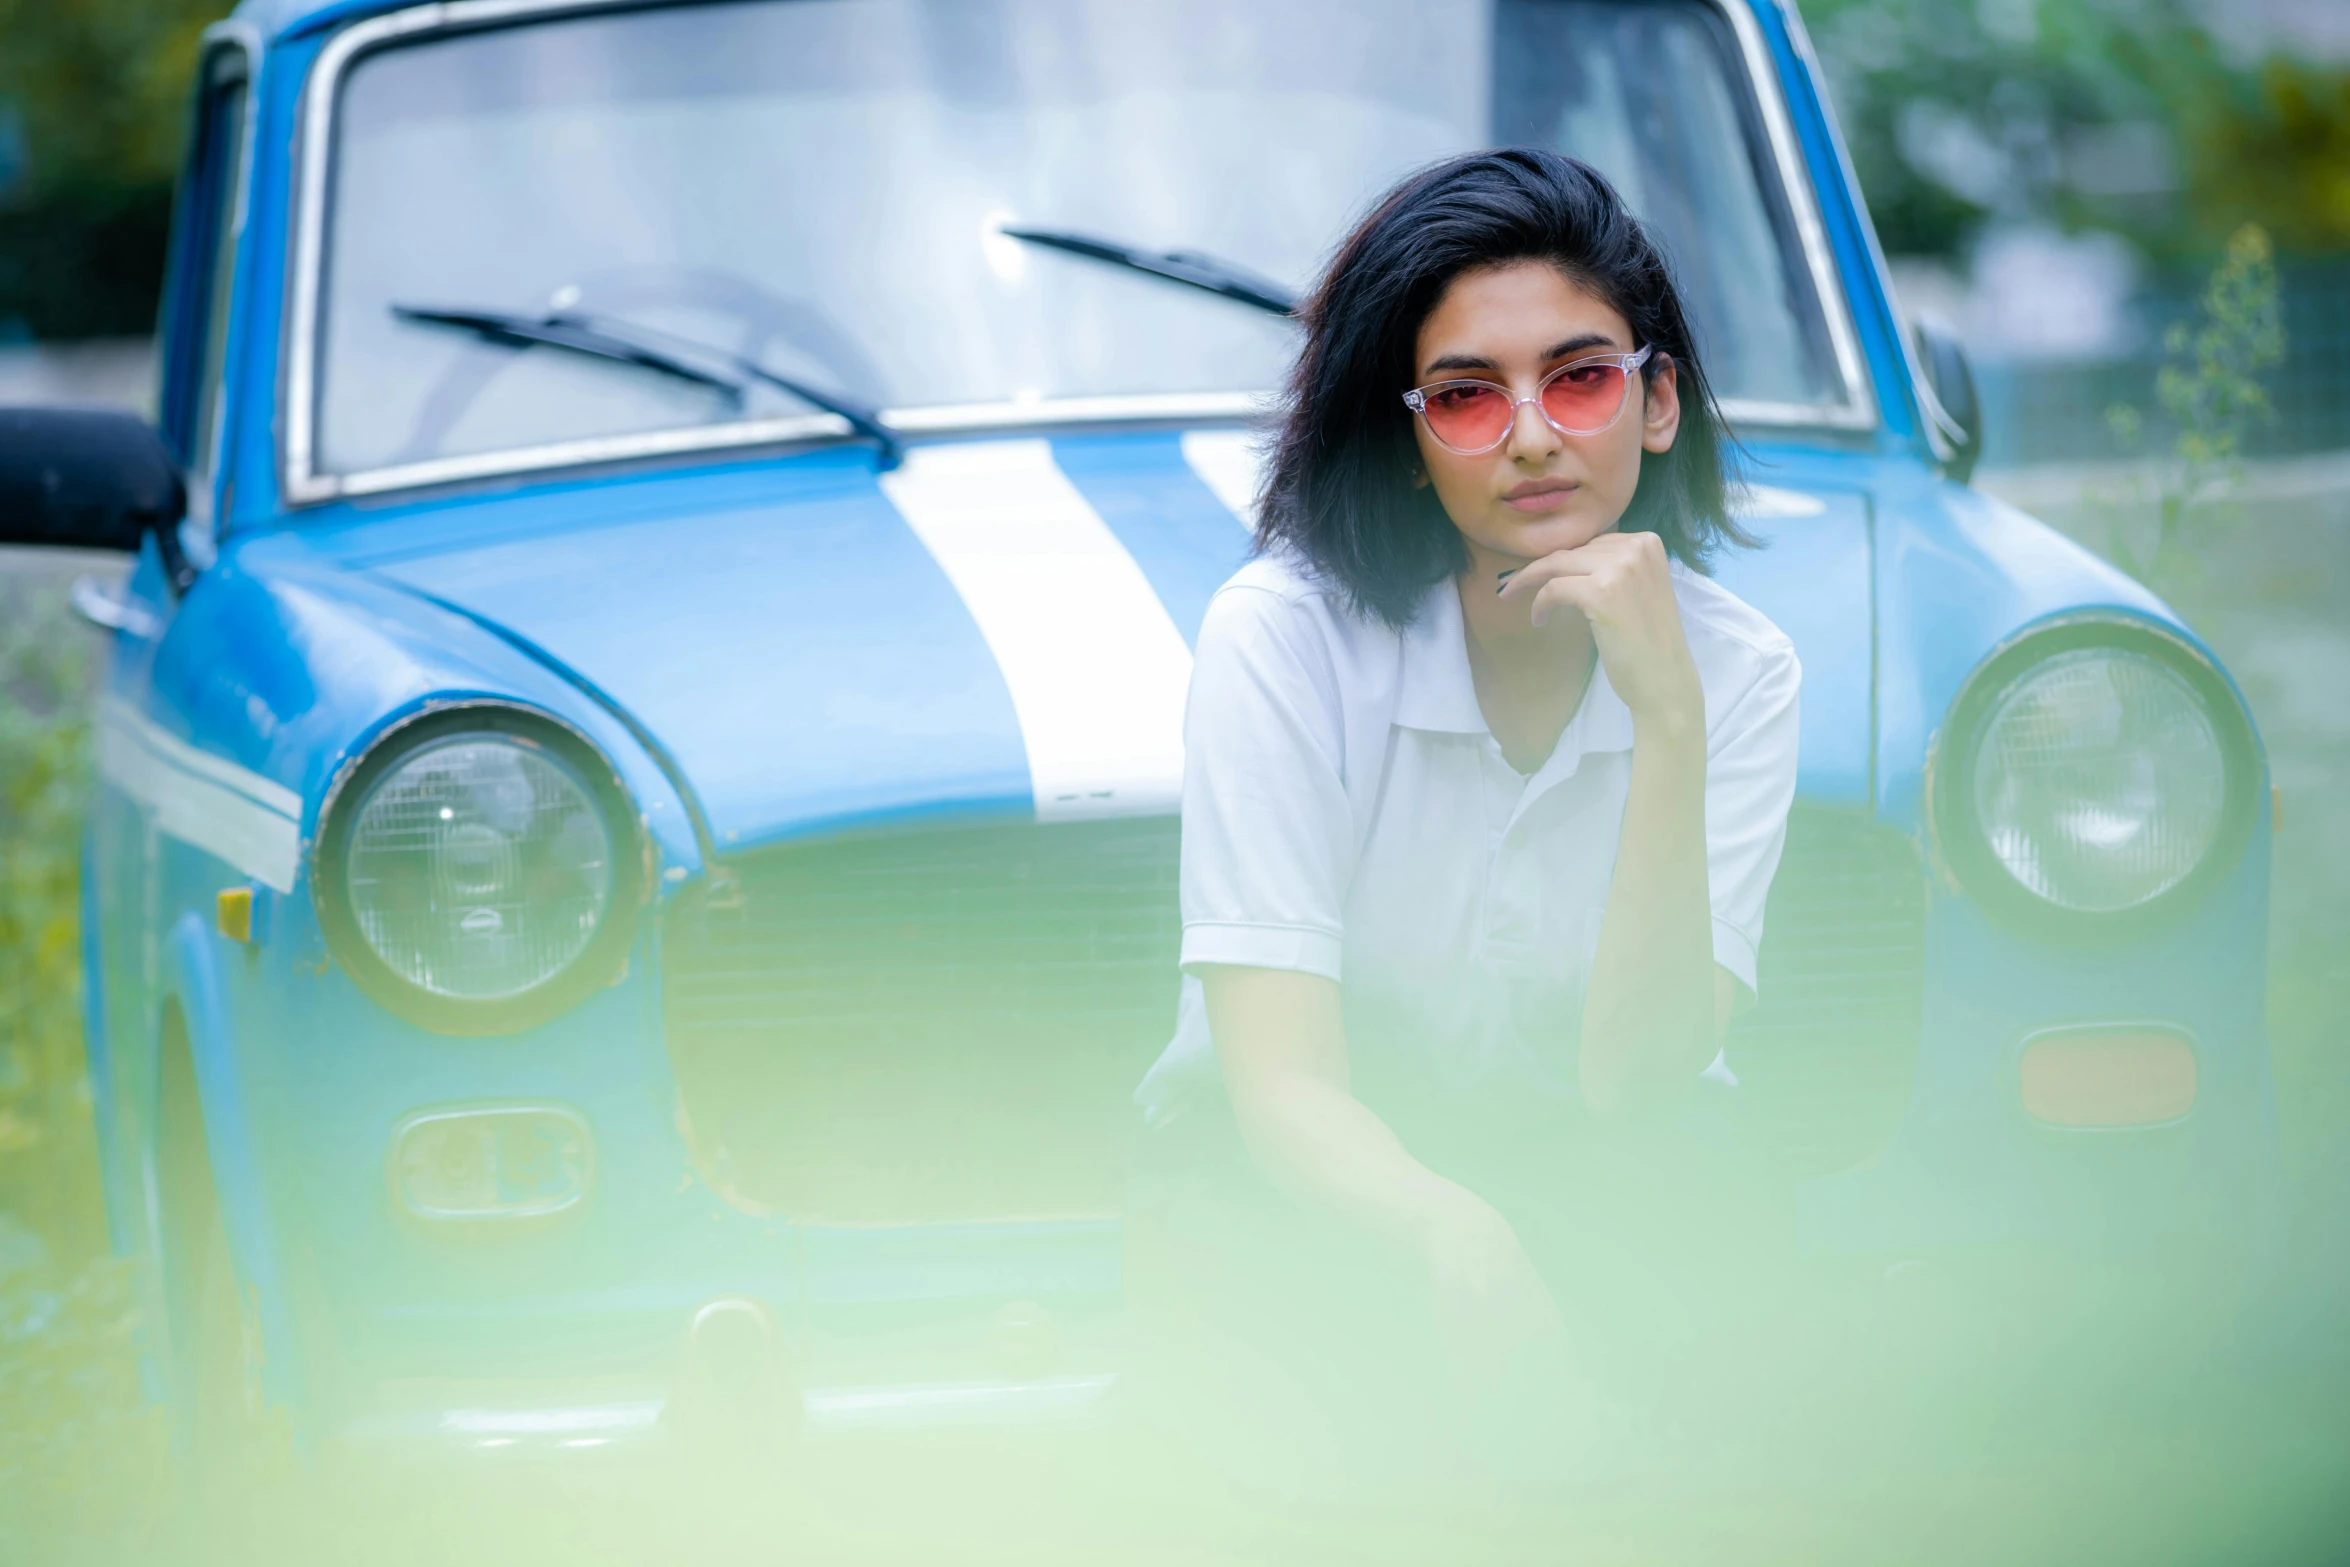 a woman in sunglasses poses next to a blue vintage car